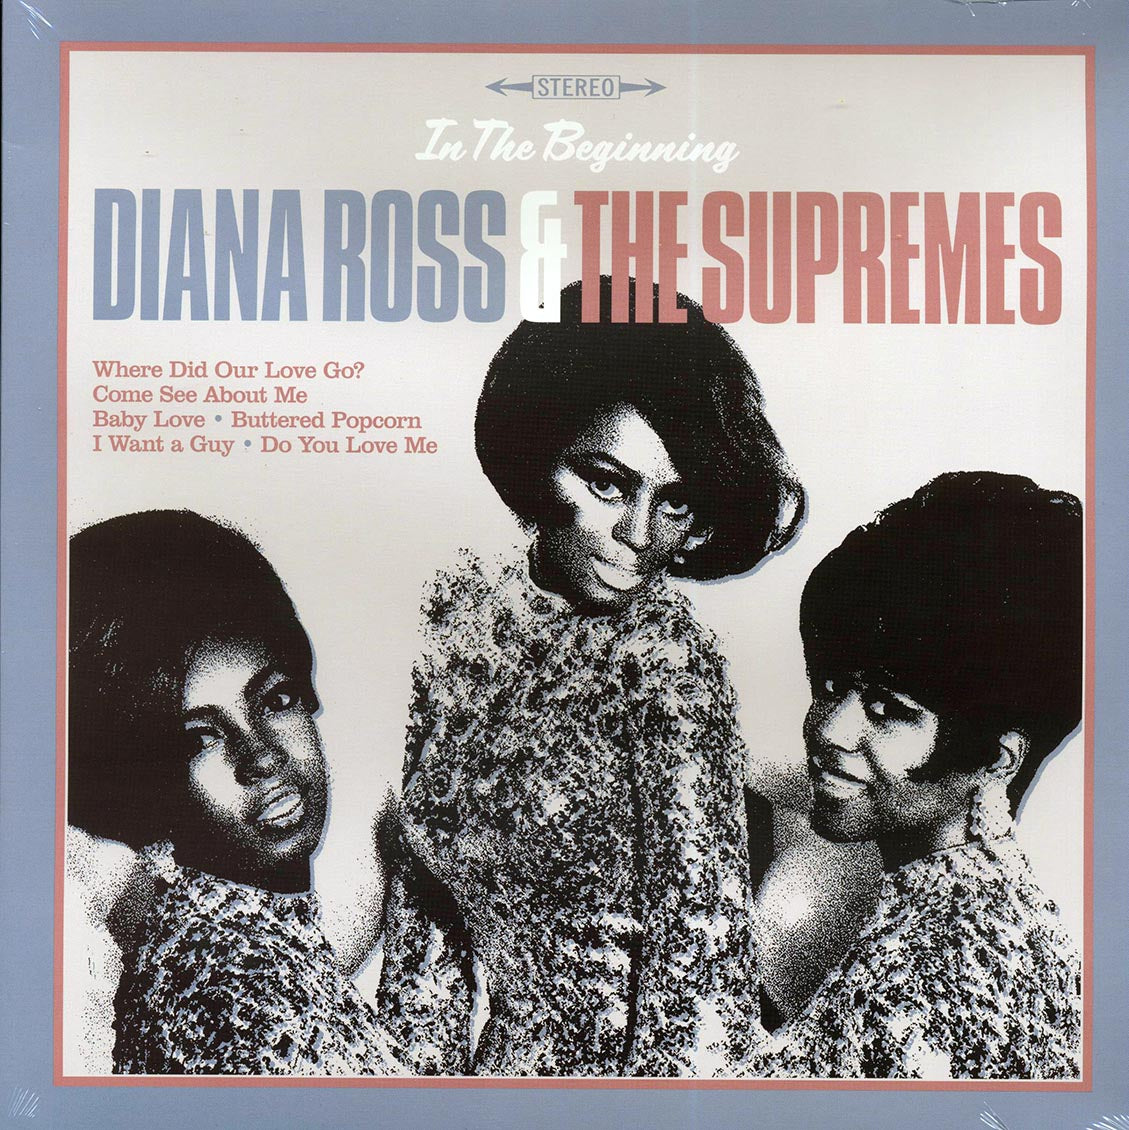 Diana Ross & The Supremes - In The Beginning - Vinyl LP